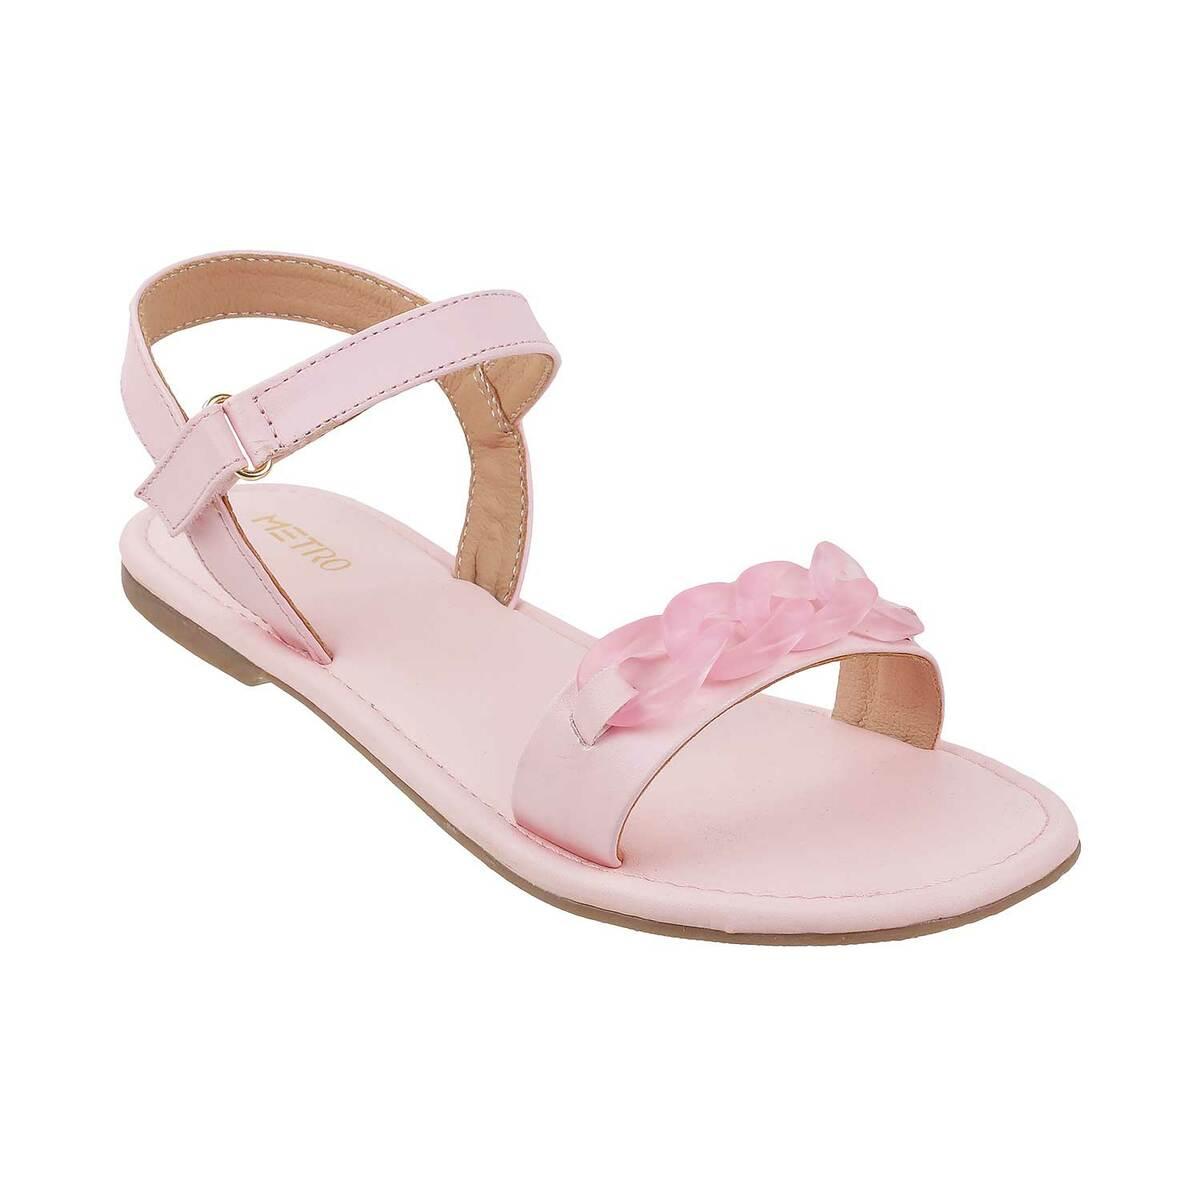 Buy Cute Walk by Babyhug Sandals Girl PINK 27 for Girls (3-4Years) Online,  Shop at FirstCry.com - 9538229